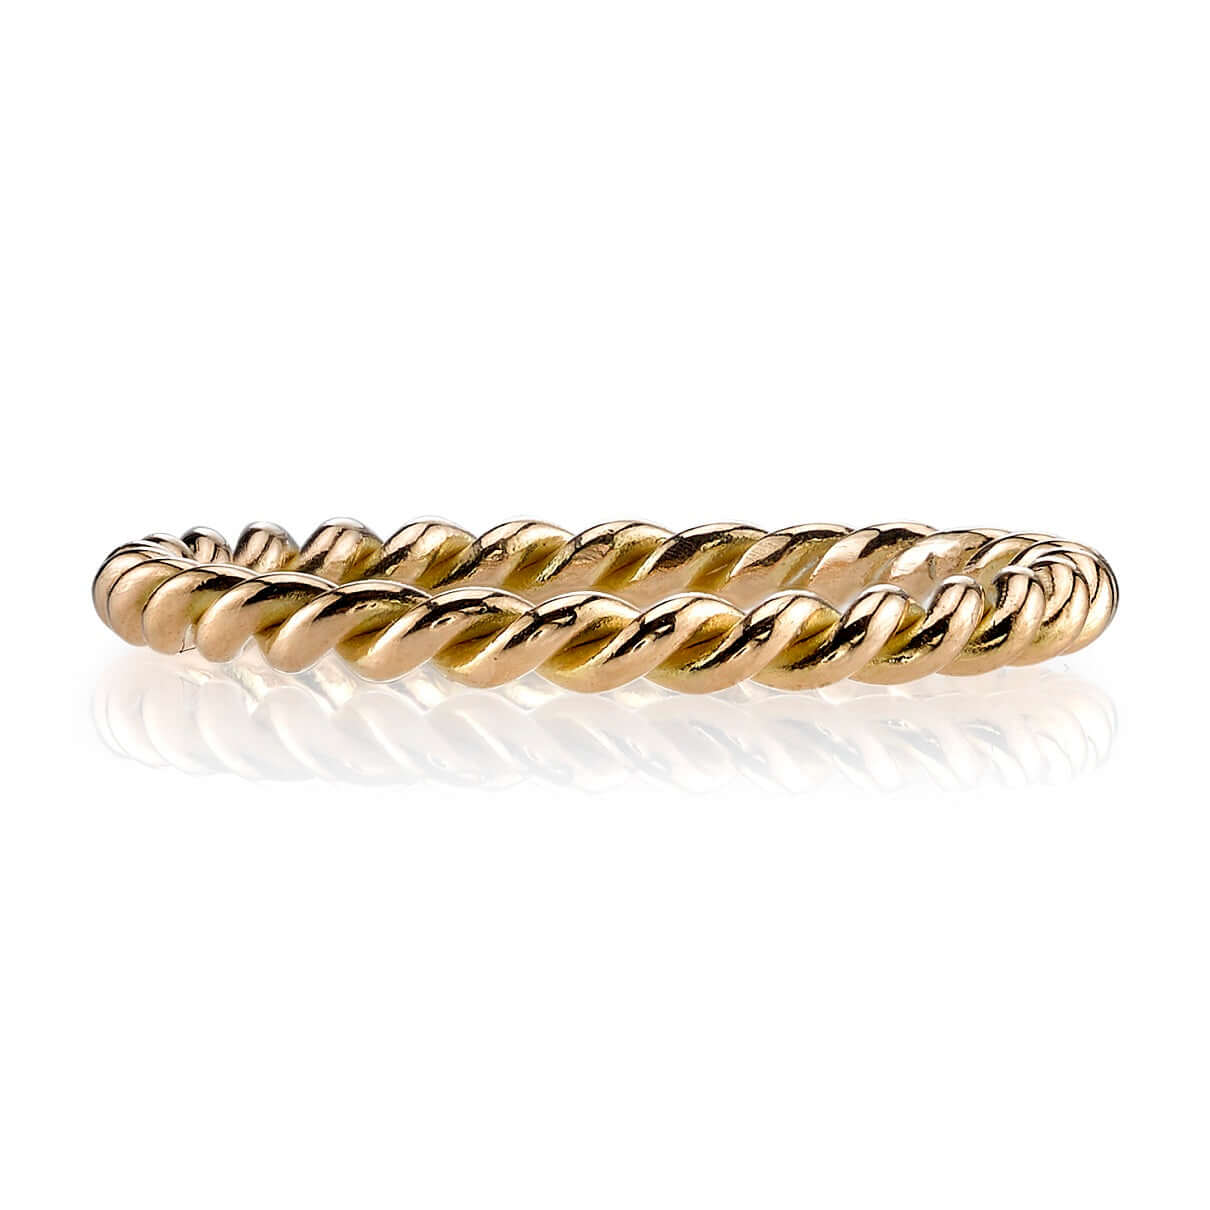 SINGLE STONE SMALL LARA BAND | Handcrafted 18K gold 2mm twisted rope band. Please inquire for additional customization.